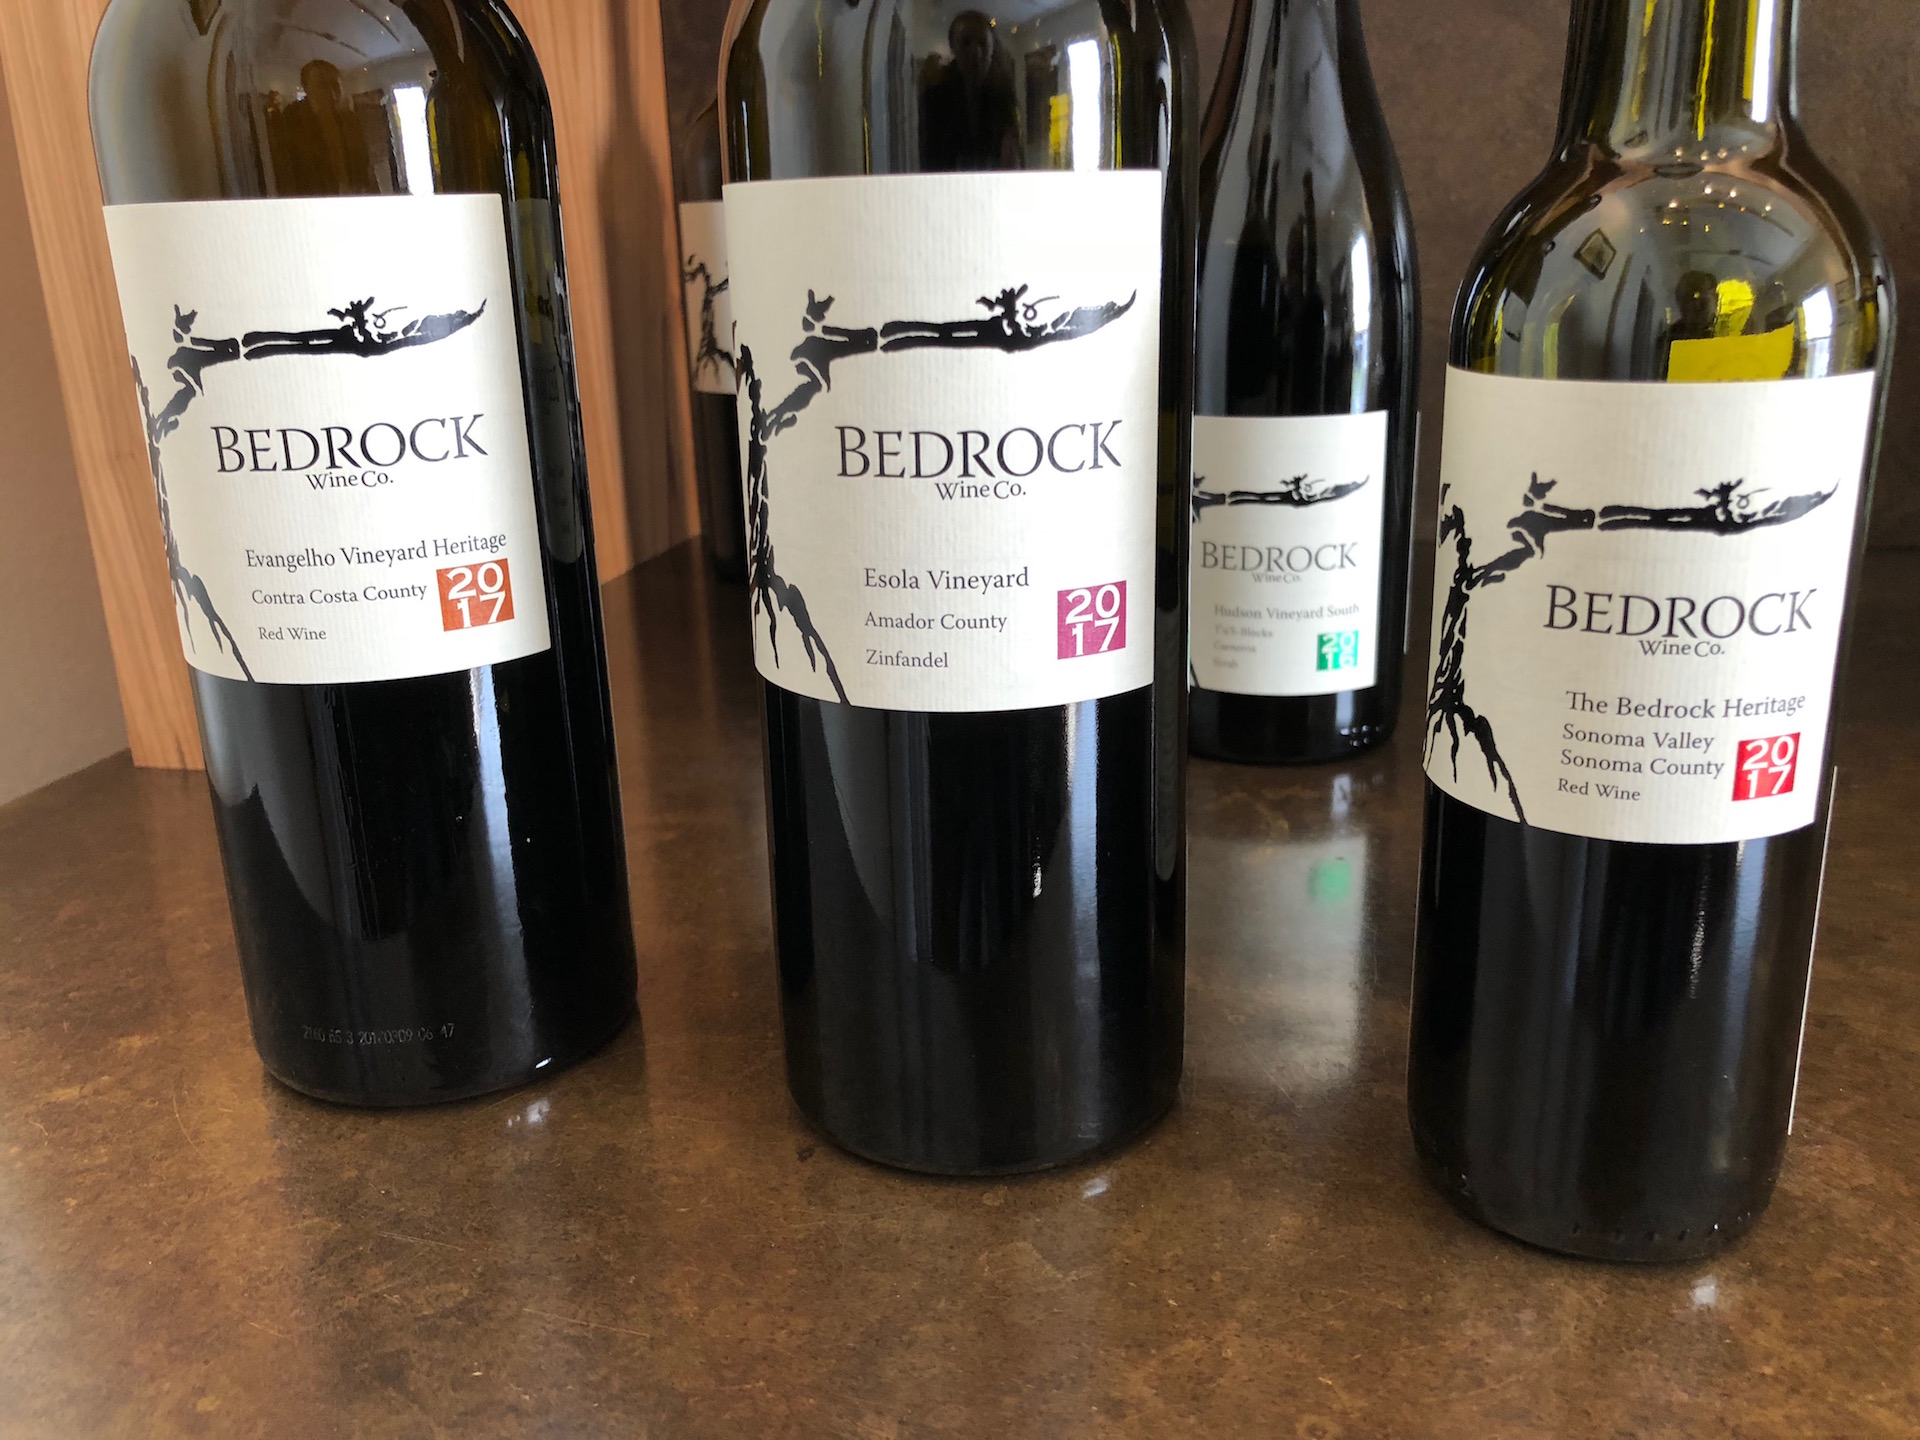 Some 2017 vintage Bedrock wines sourced from vineyards all over Northern California